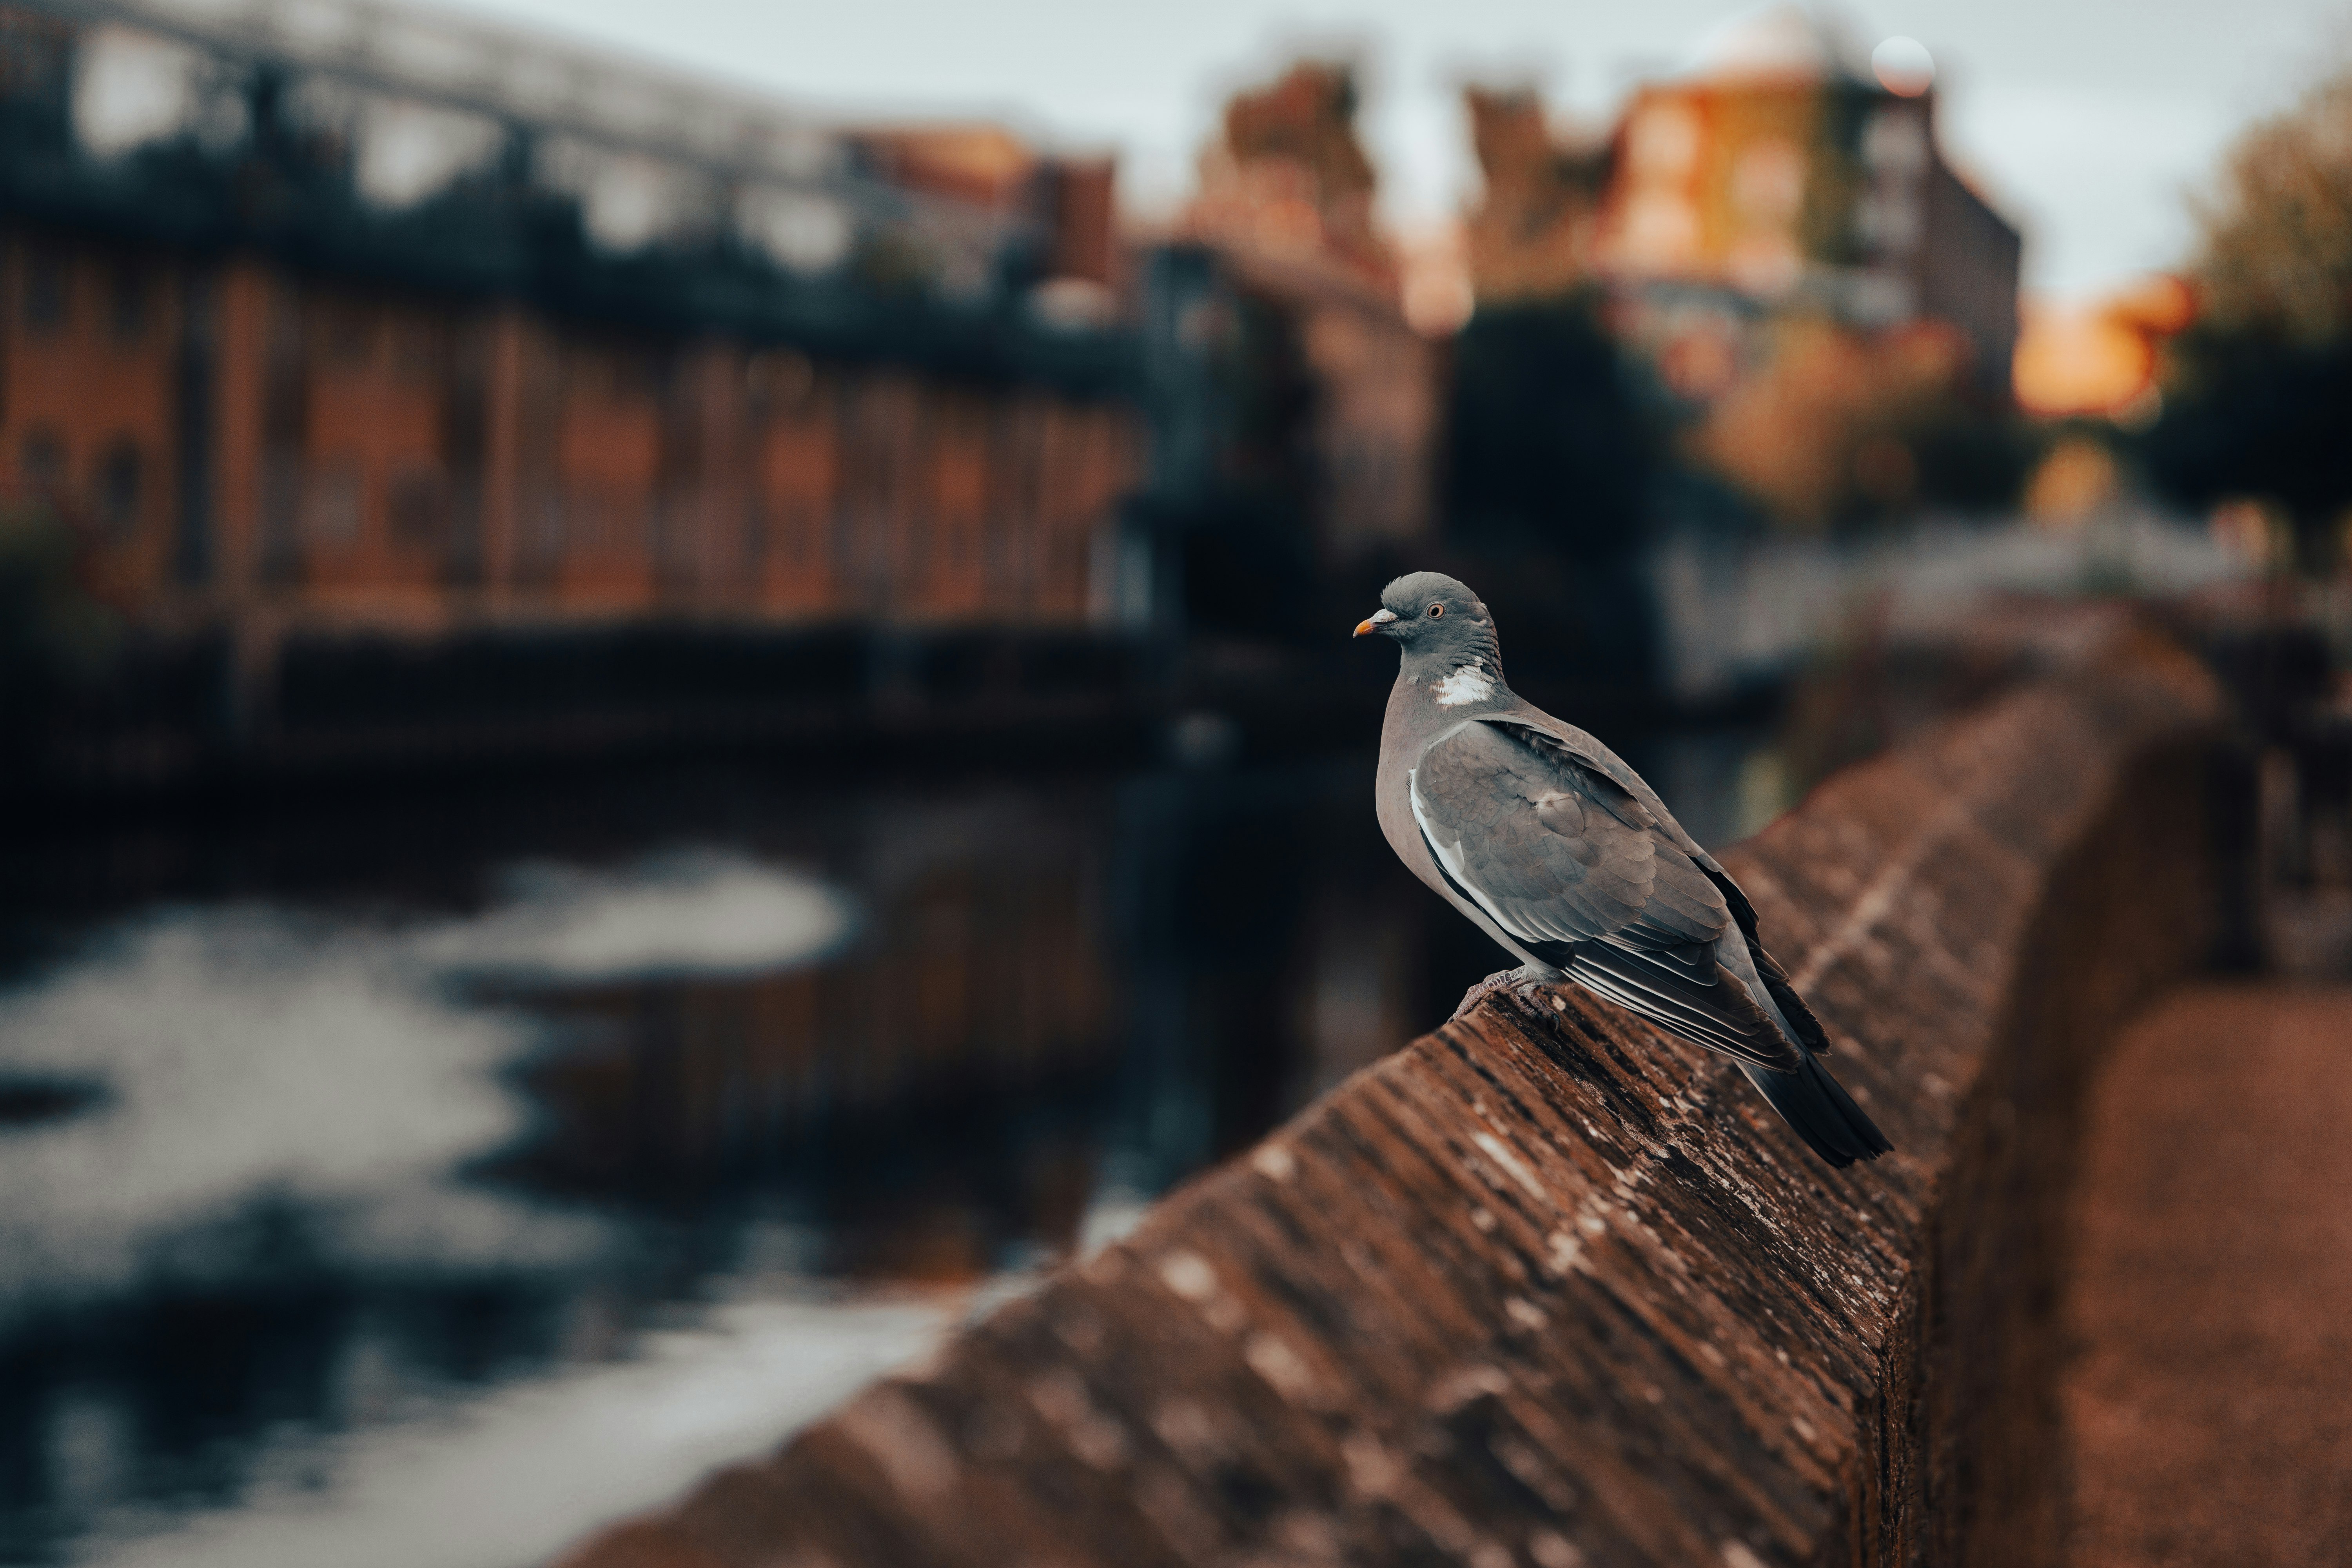 grey and white bird on brown wooden fence during daytime